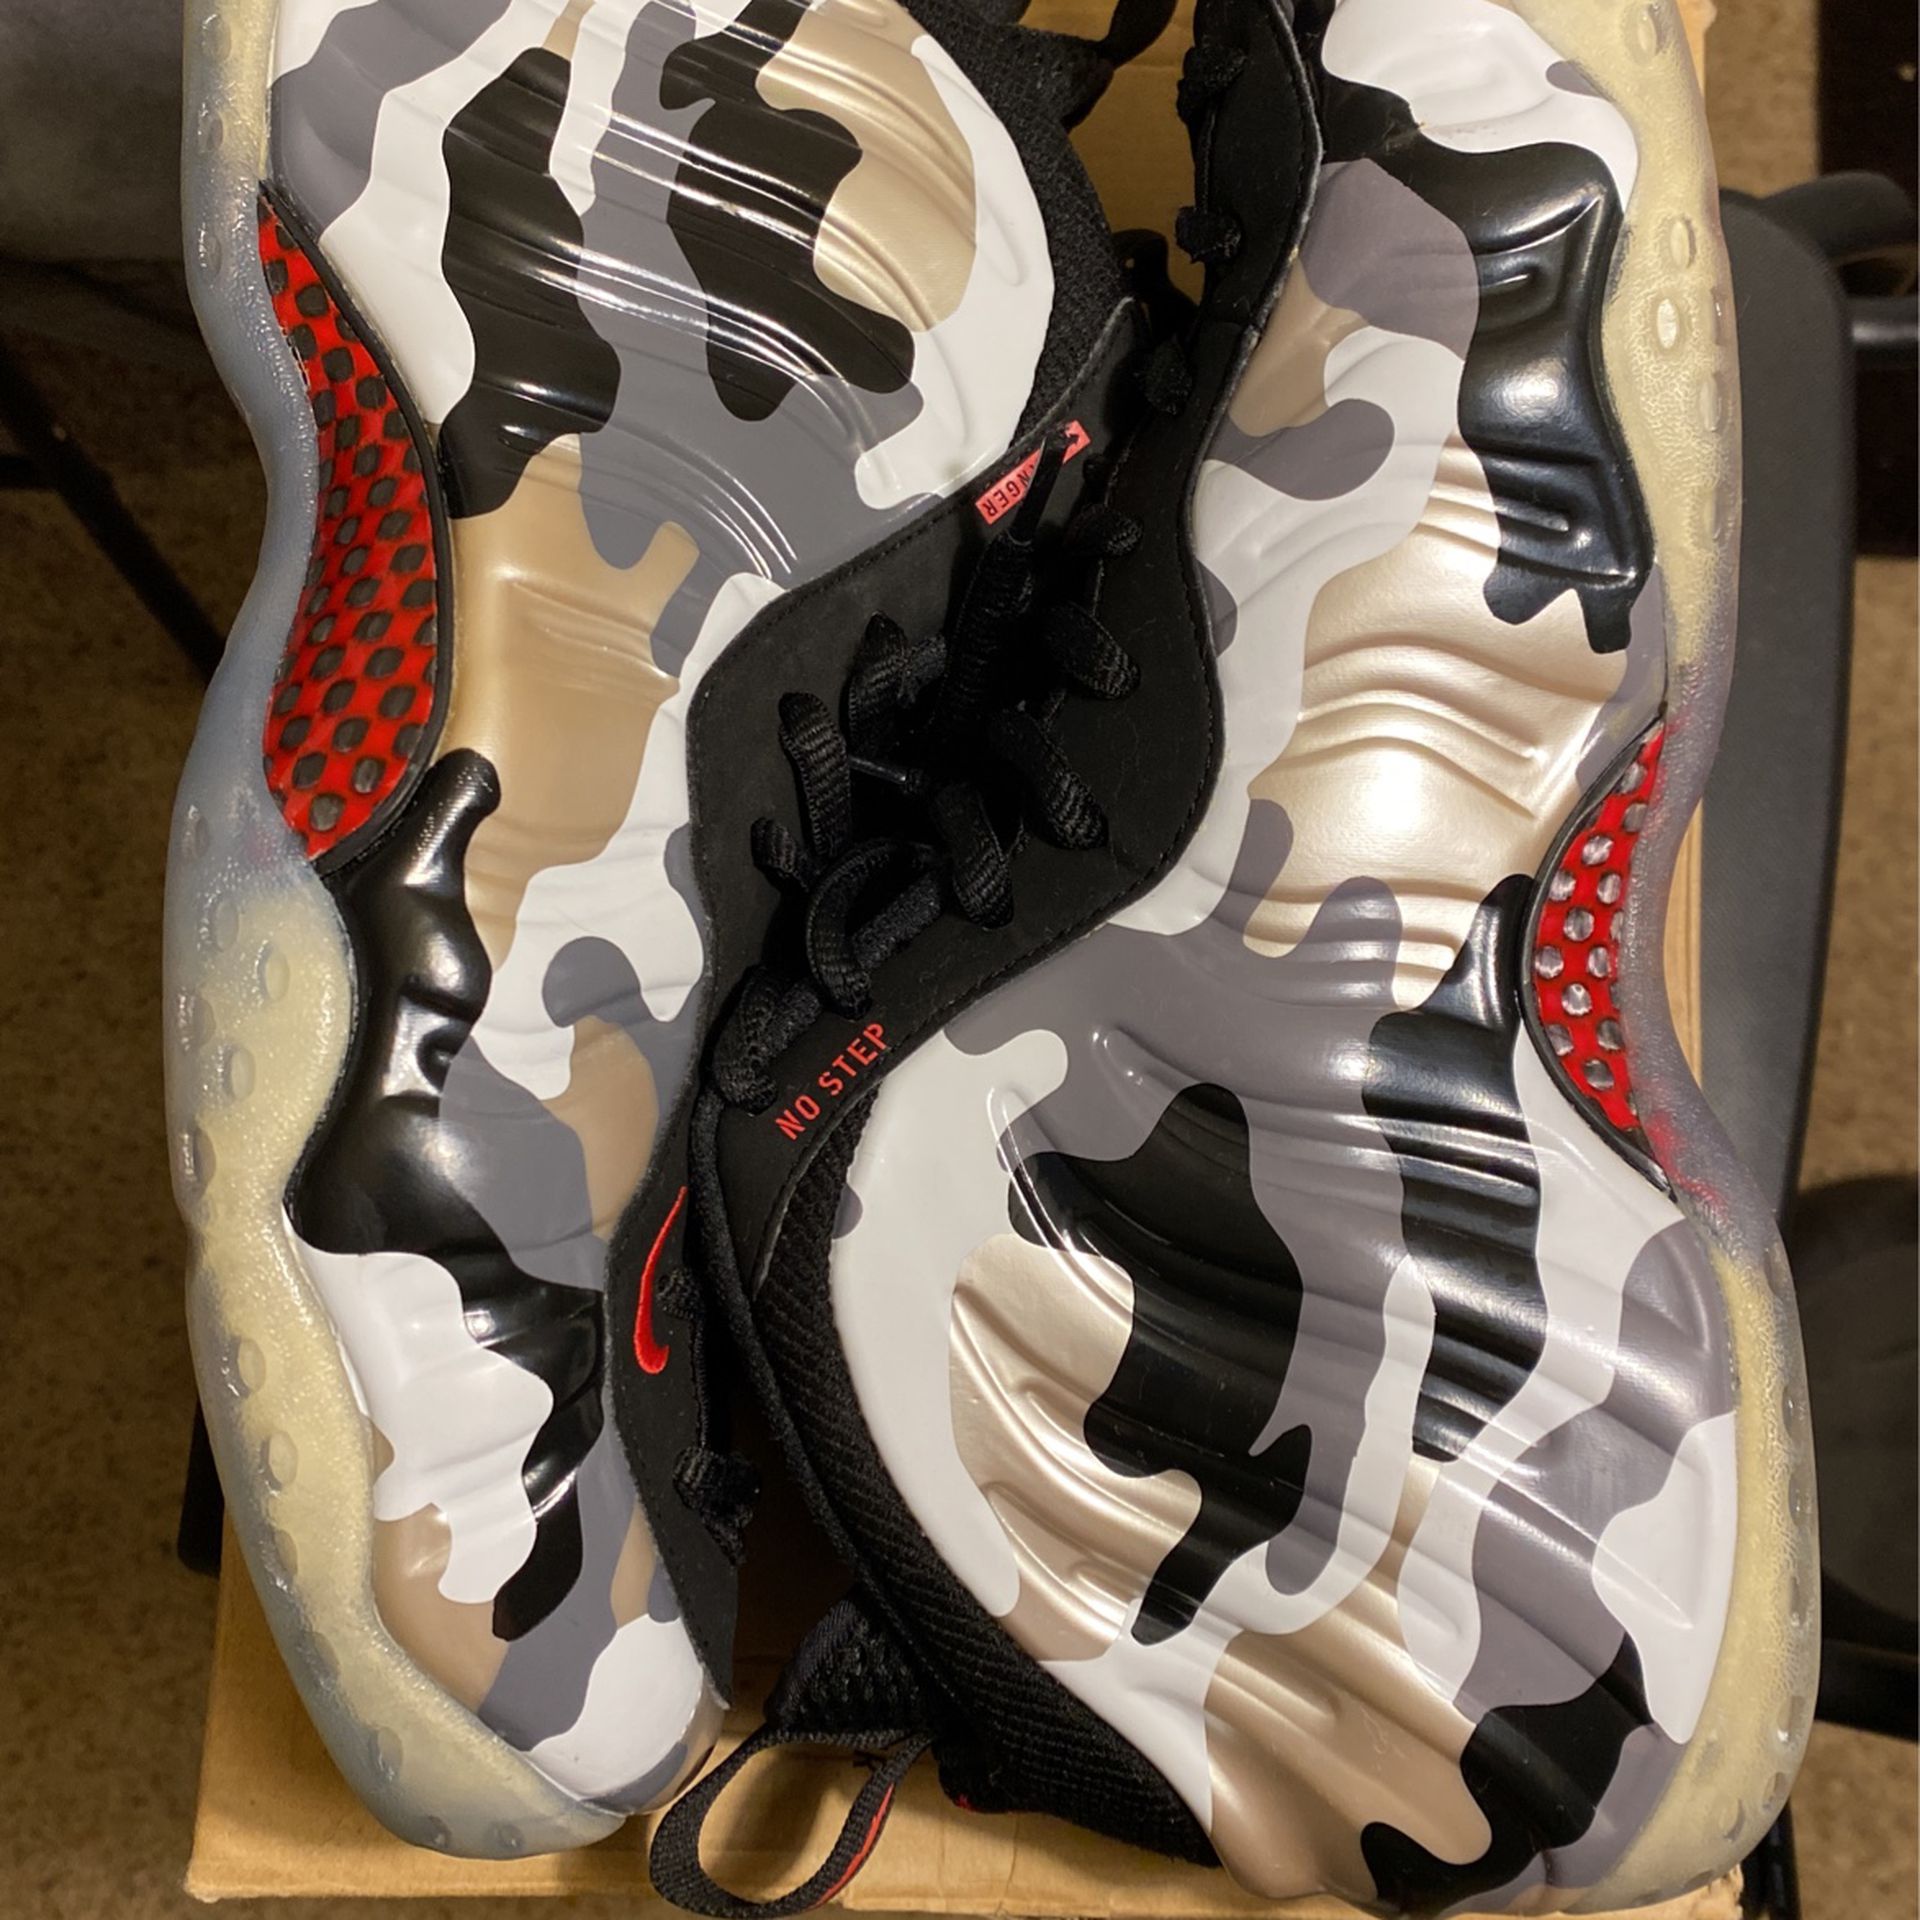 Nike Foamposite Fighter Jets for Sale in Vacaville, CA - OfferUp